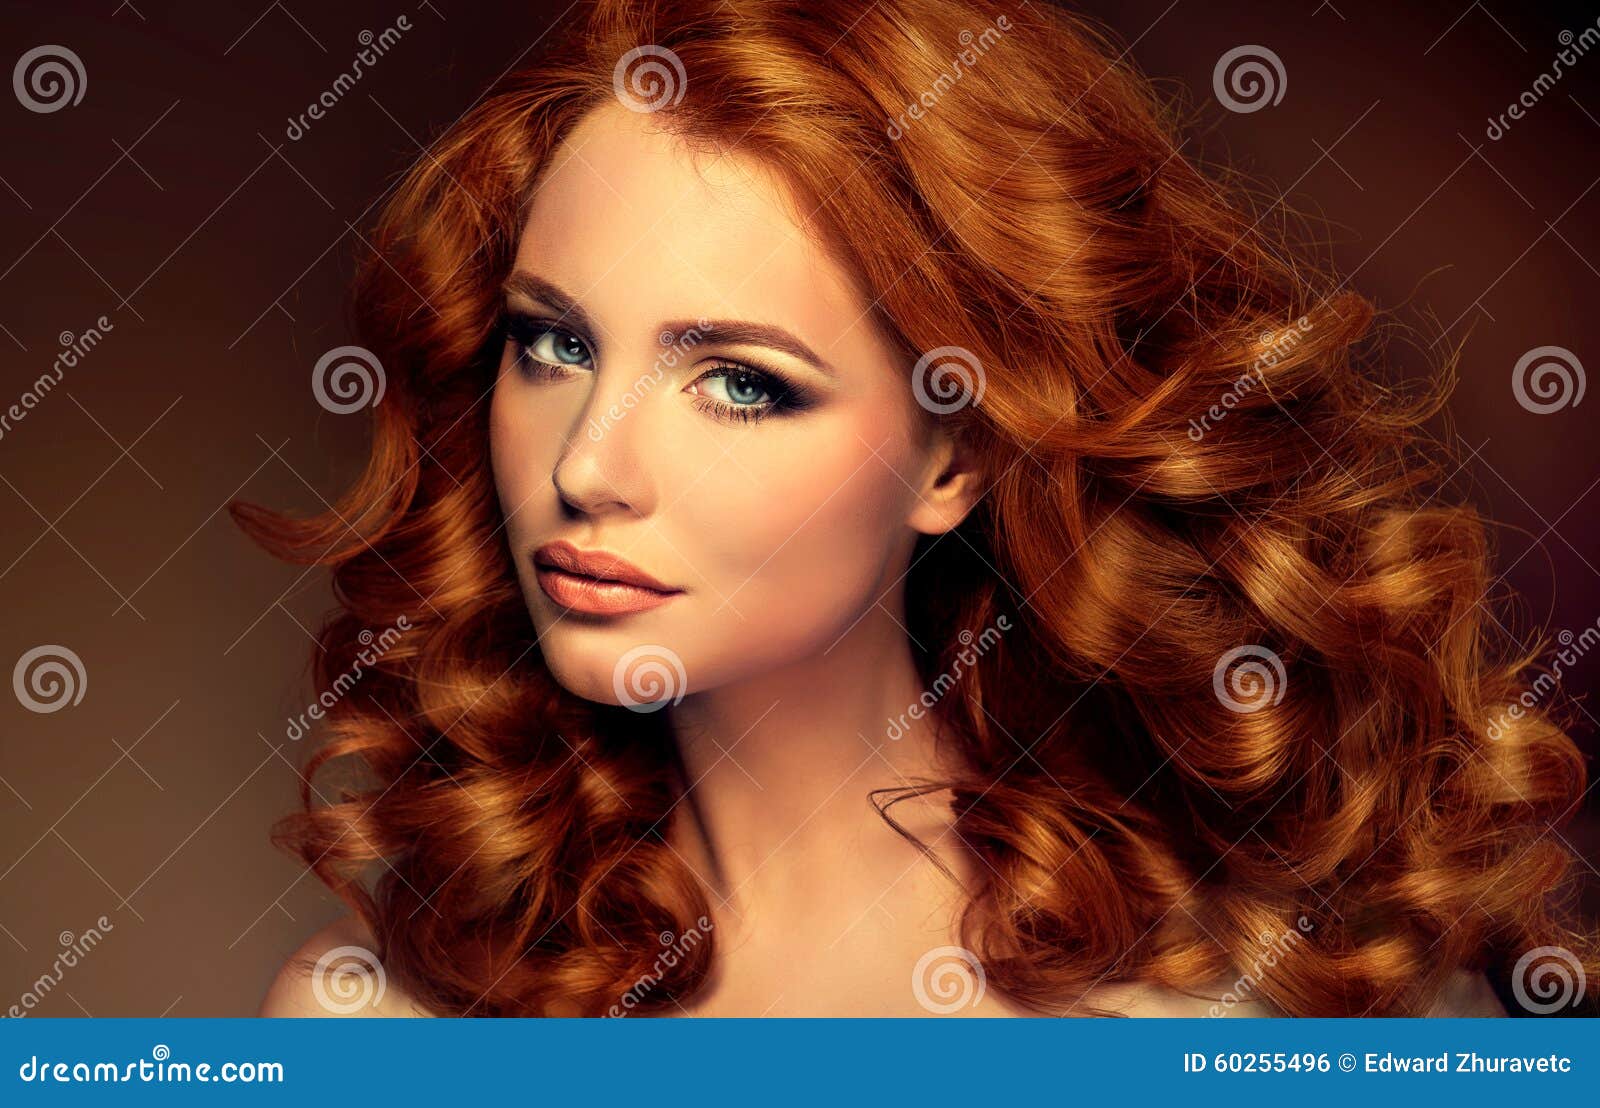 Model With Red Hair